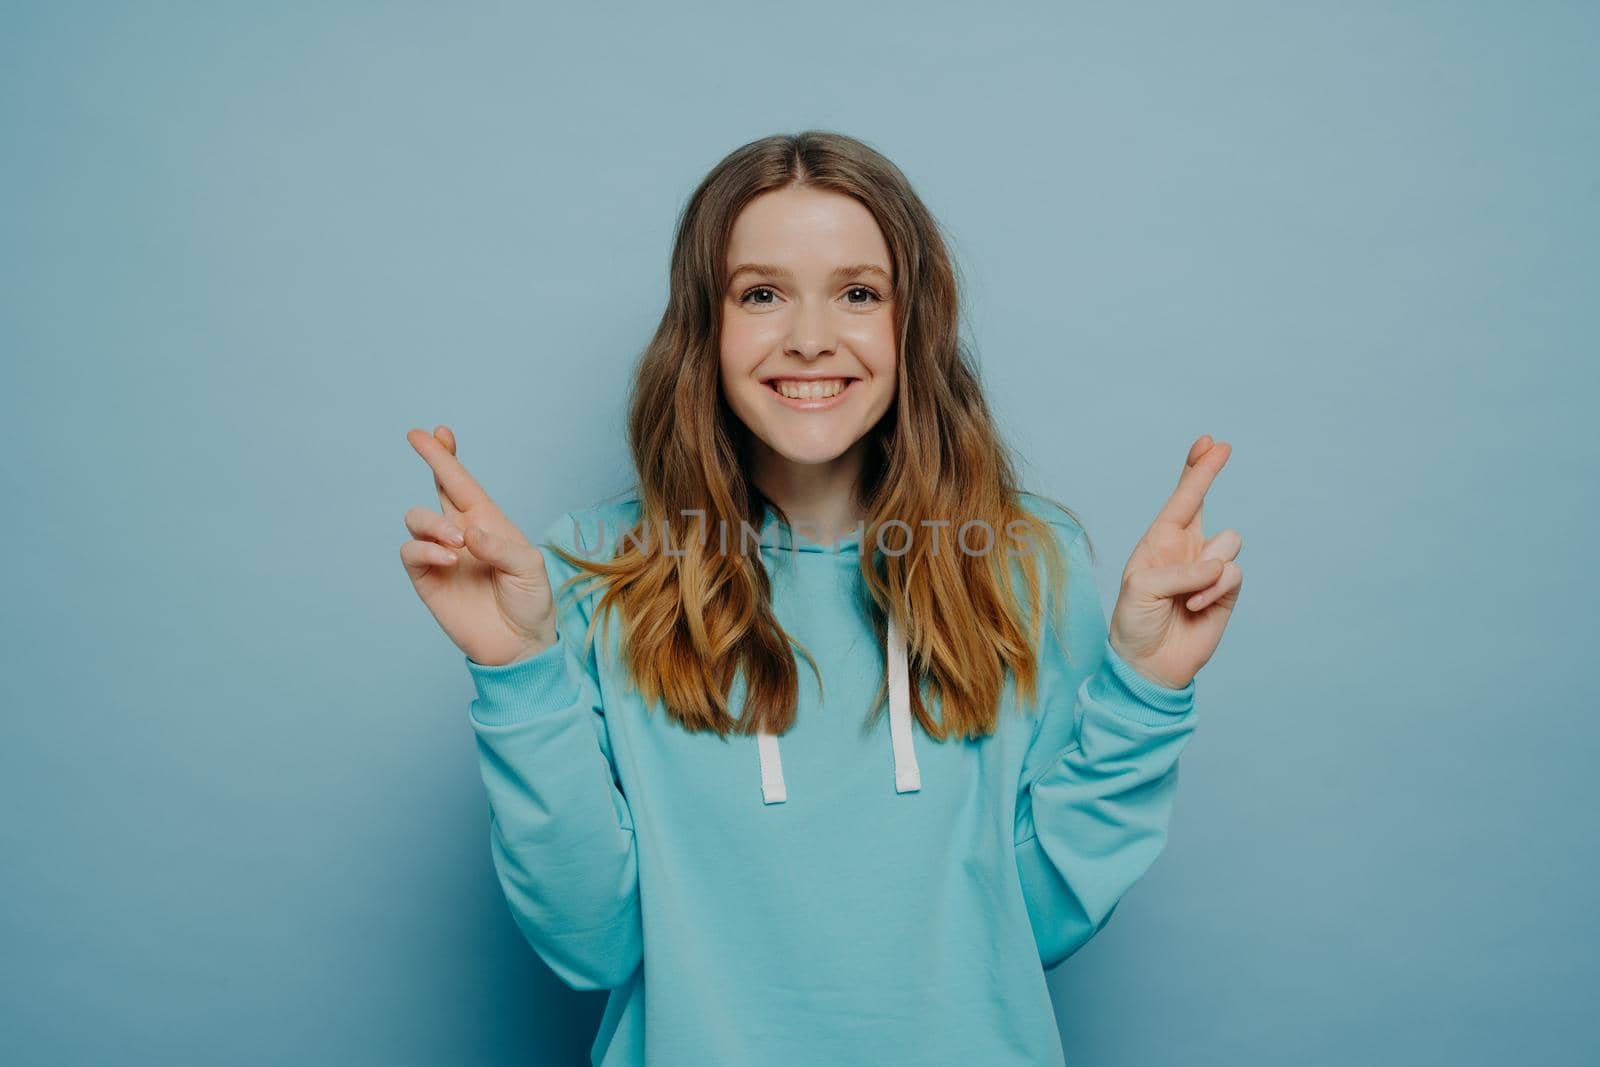 Excited smiling young girl with wavy ombre hair keeping fingers crossed looking at camera wearing casual sweater posing isolated on light blue studio background. Body language concept